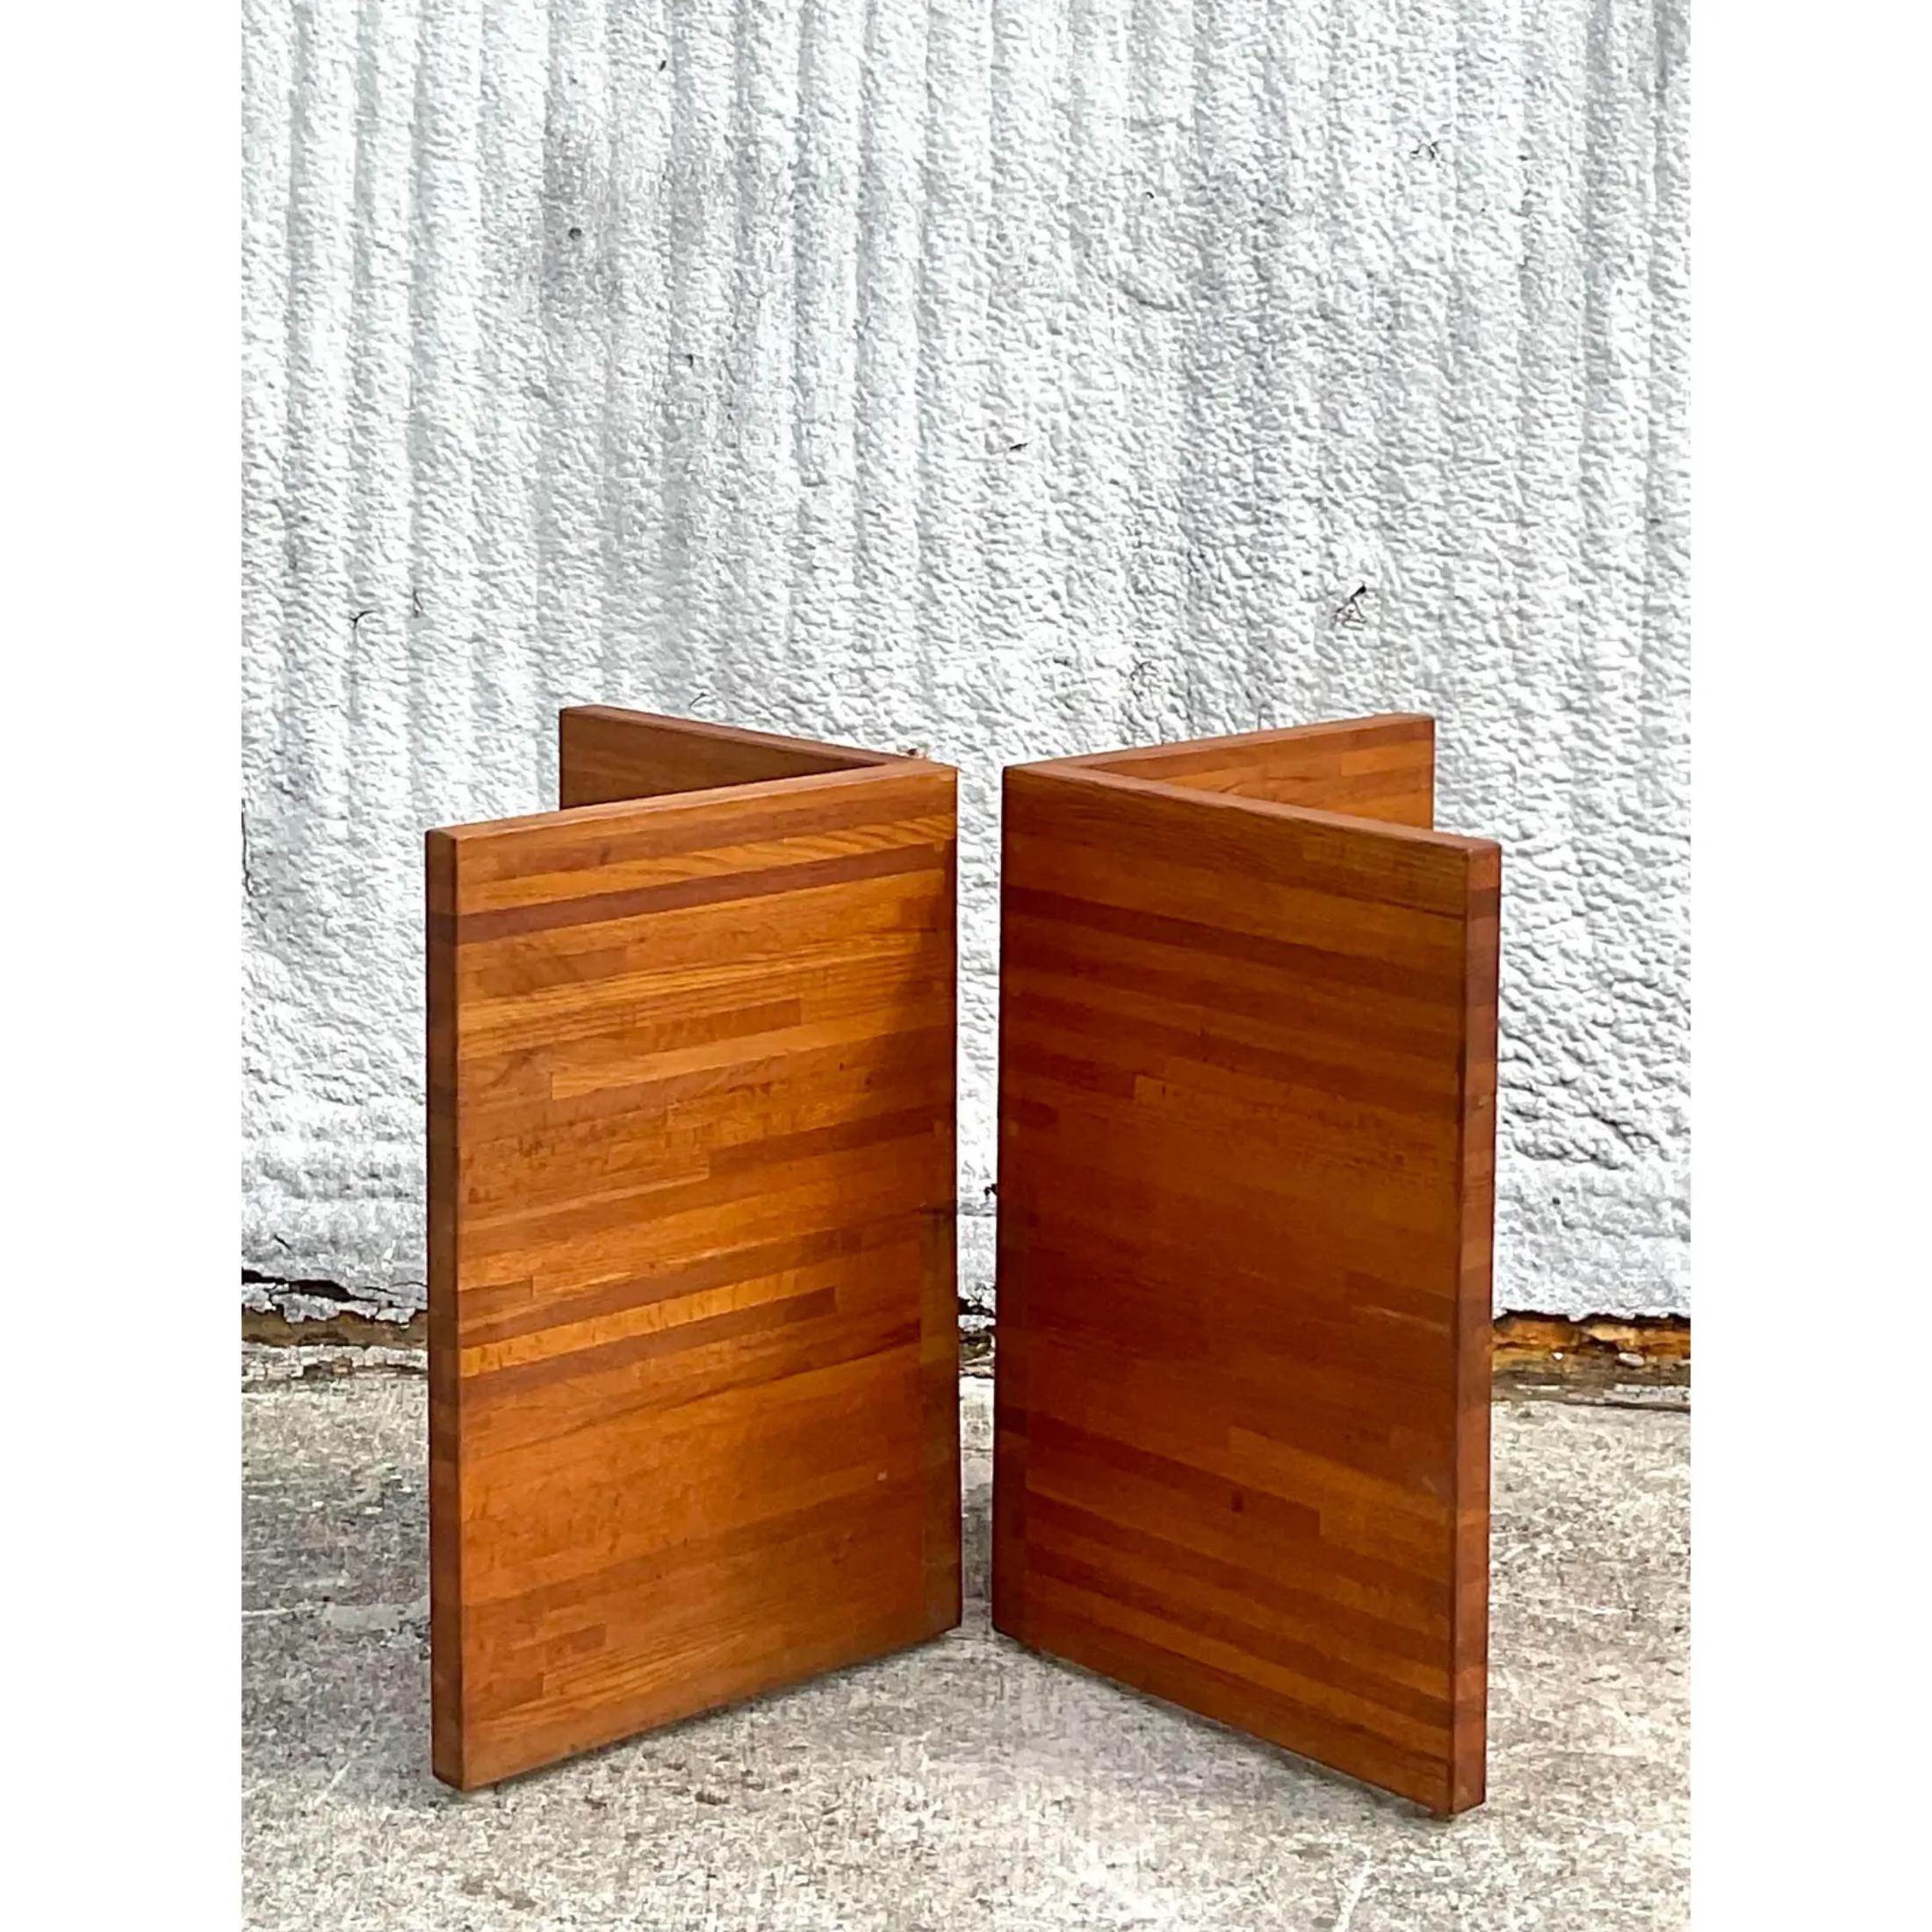 Fantastic vintage Butcher Block Slab dining table pedestals. a clean and chic L shaped pair that dative any room a boho look. Perfect as a dining table or even used for a desk. Acquired from a Palm Beach estate